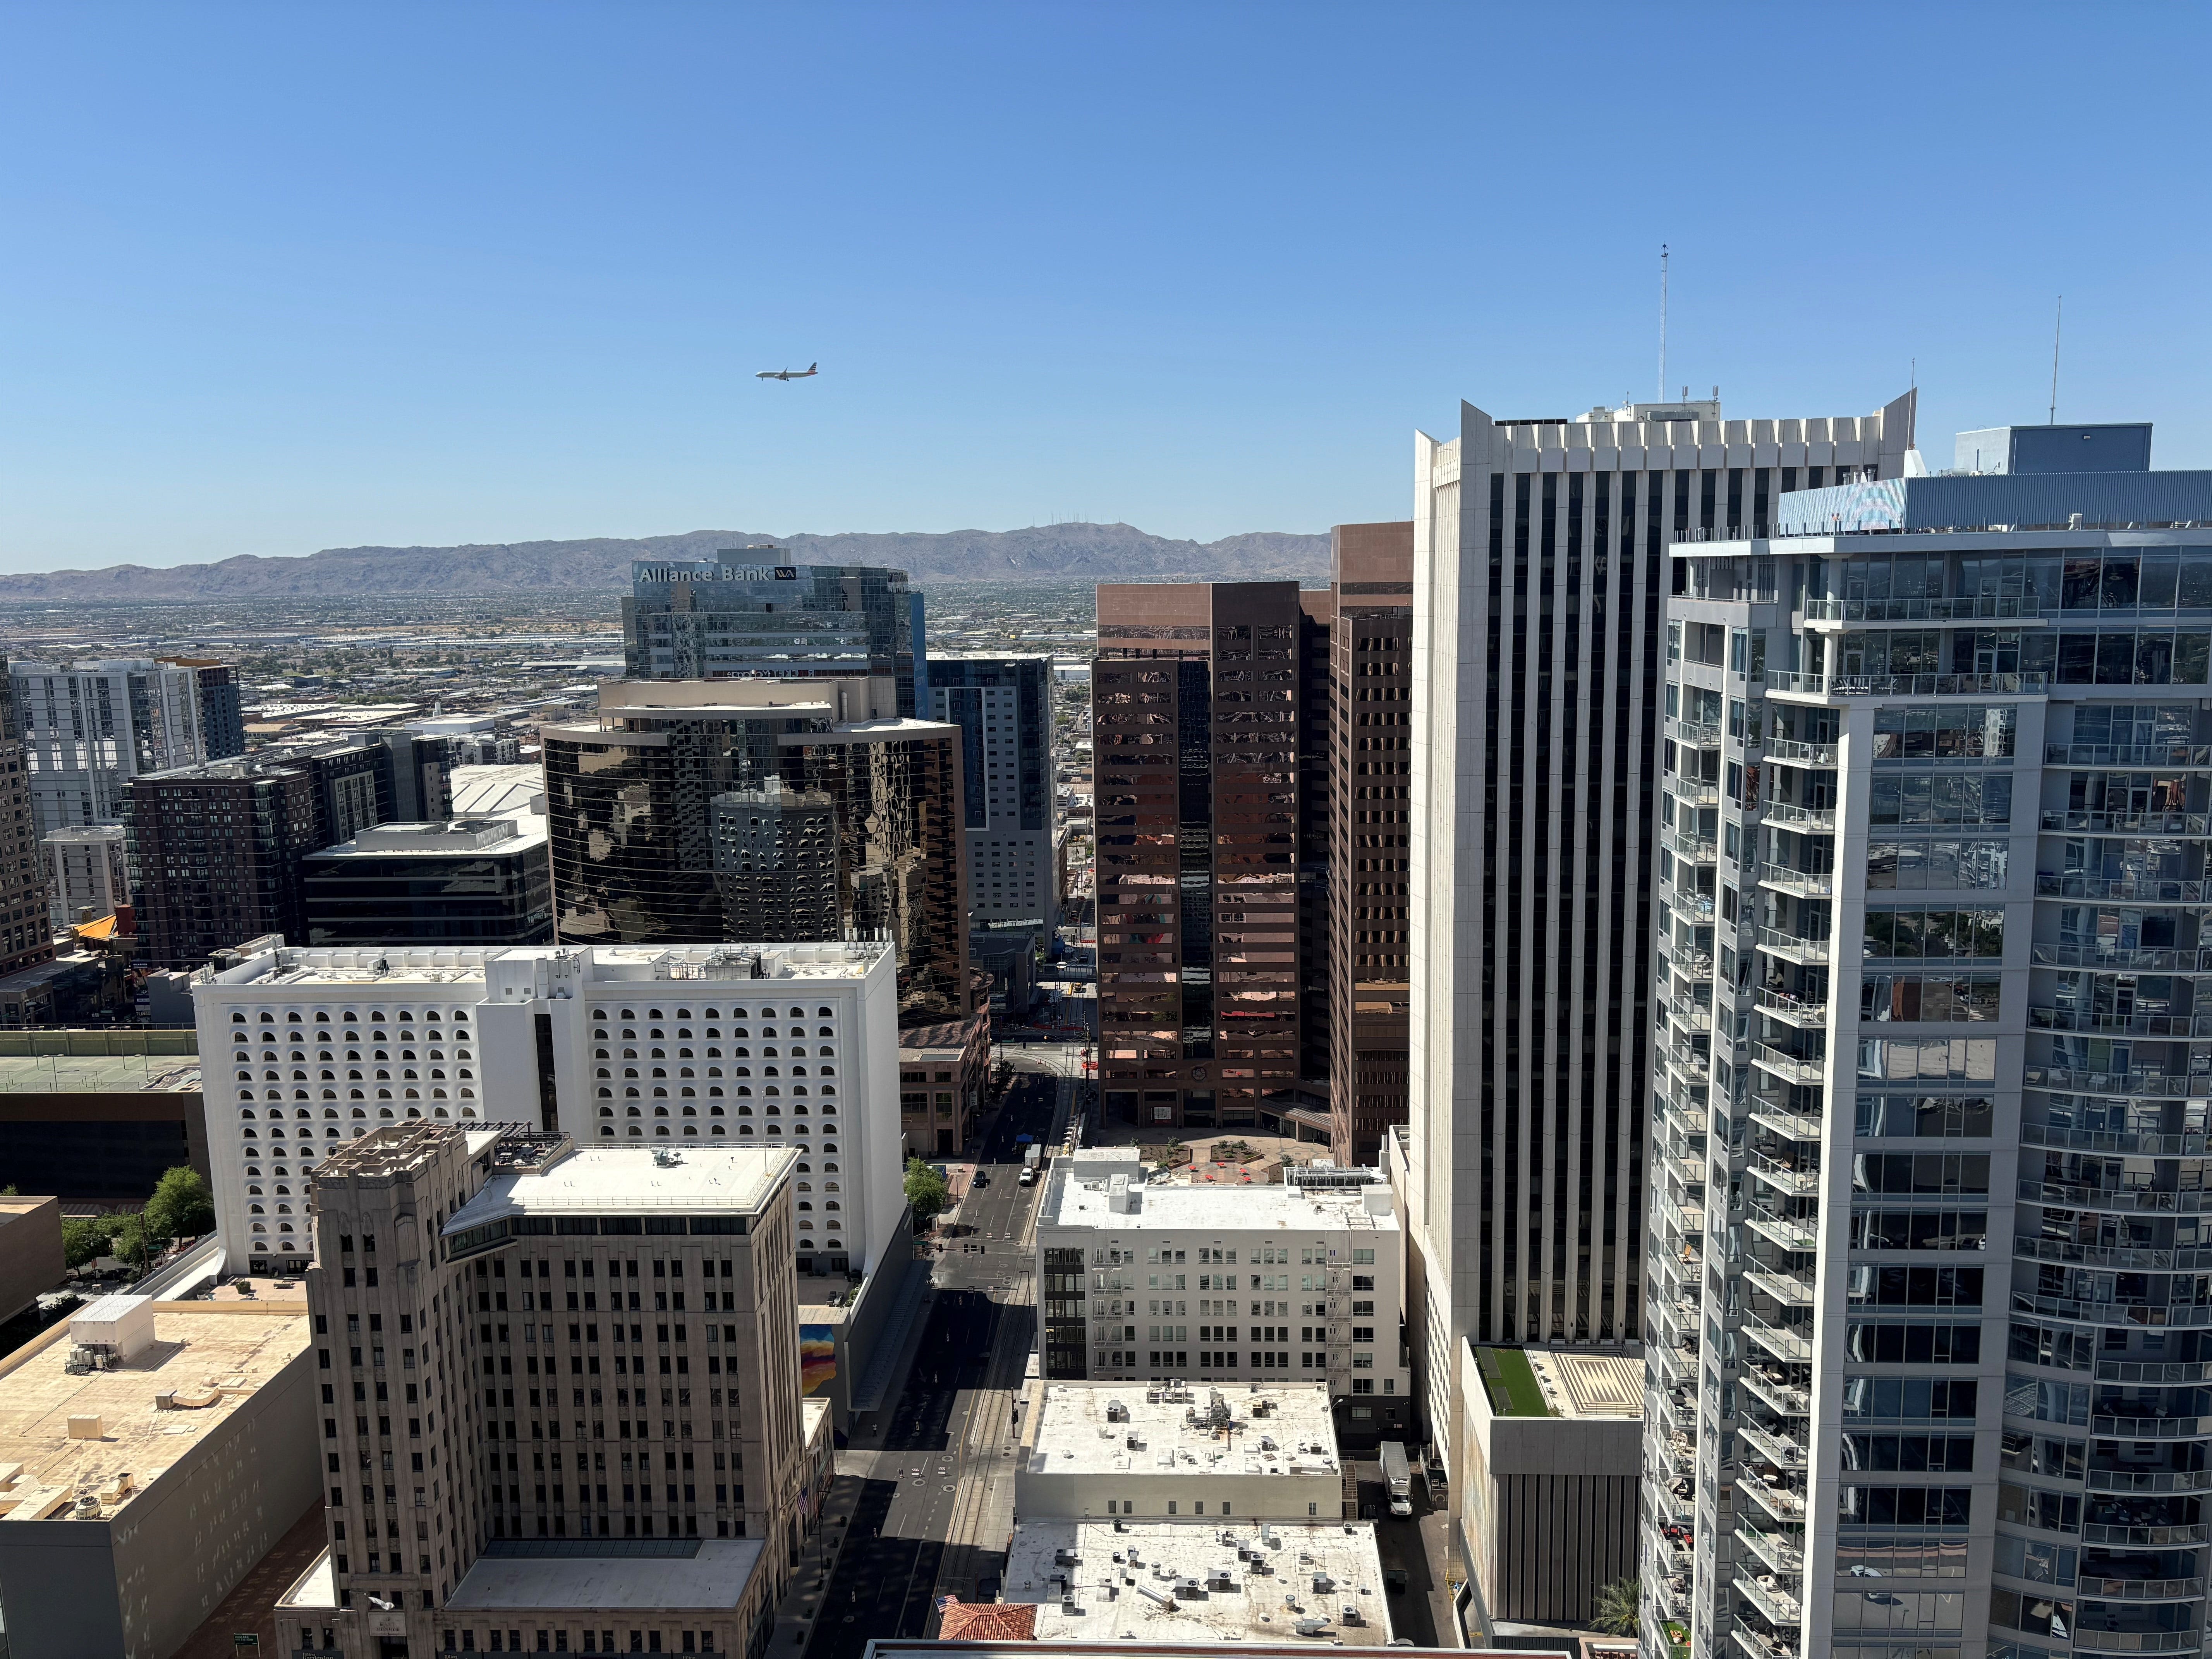 Downtown Phoenix development that includes transit center, apartment towers to open in 2025